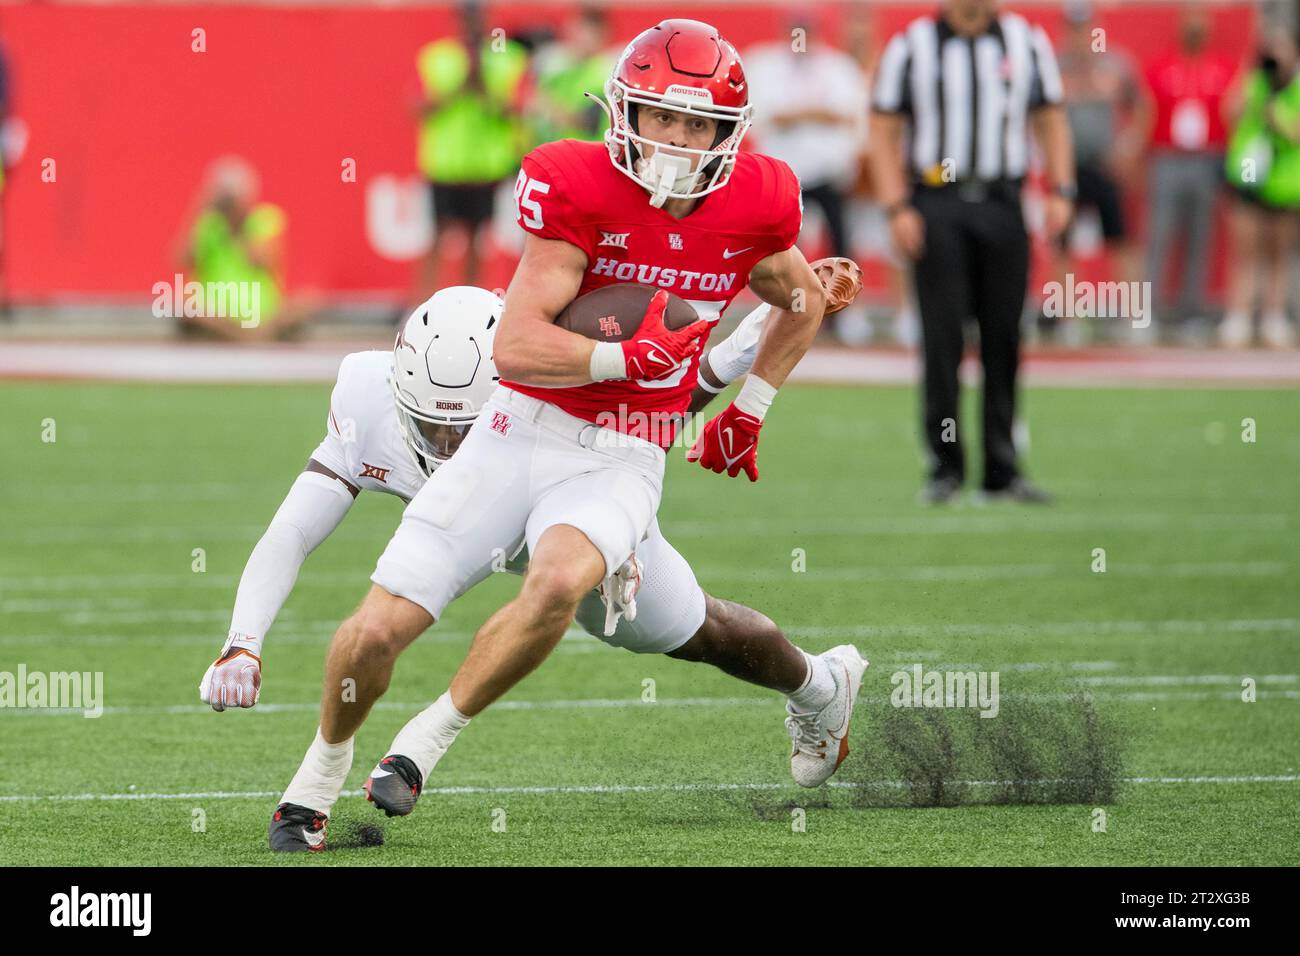 Houston, TX, USA. 21st Oct, 2023. Houston Cougars wide receiver Dalton Carnes (85) runs after making a catch during a game between the Texas Longhorns and the Houston Cougars in Houston, TX. Trask Smith/CSM/Alamy Live News Stock Photo